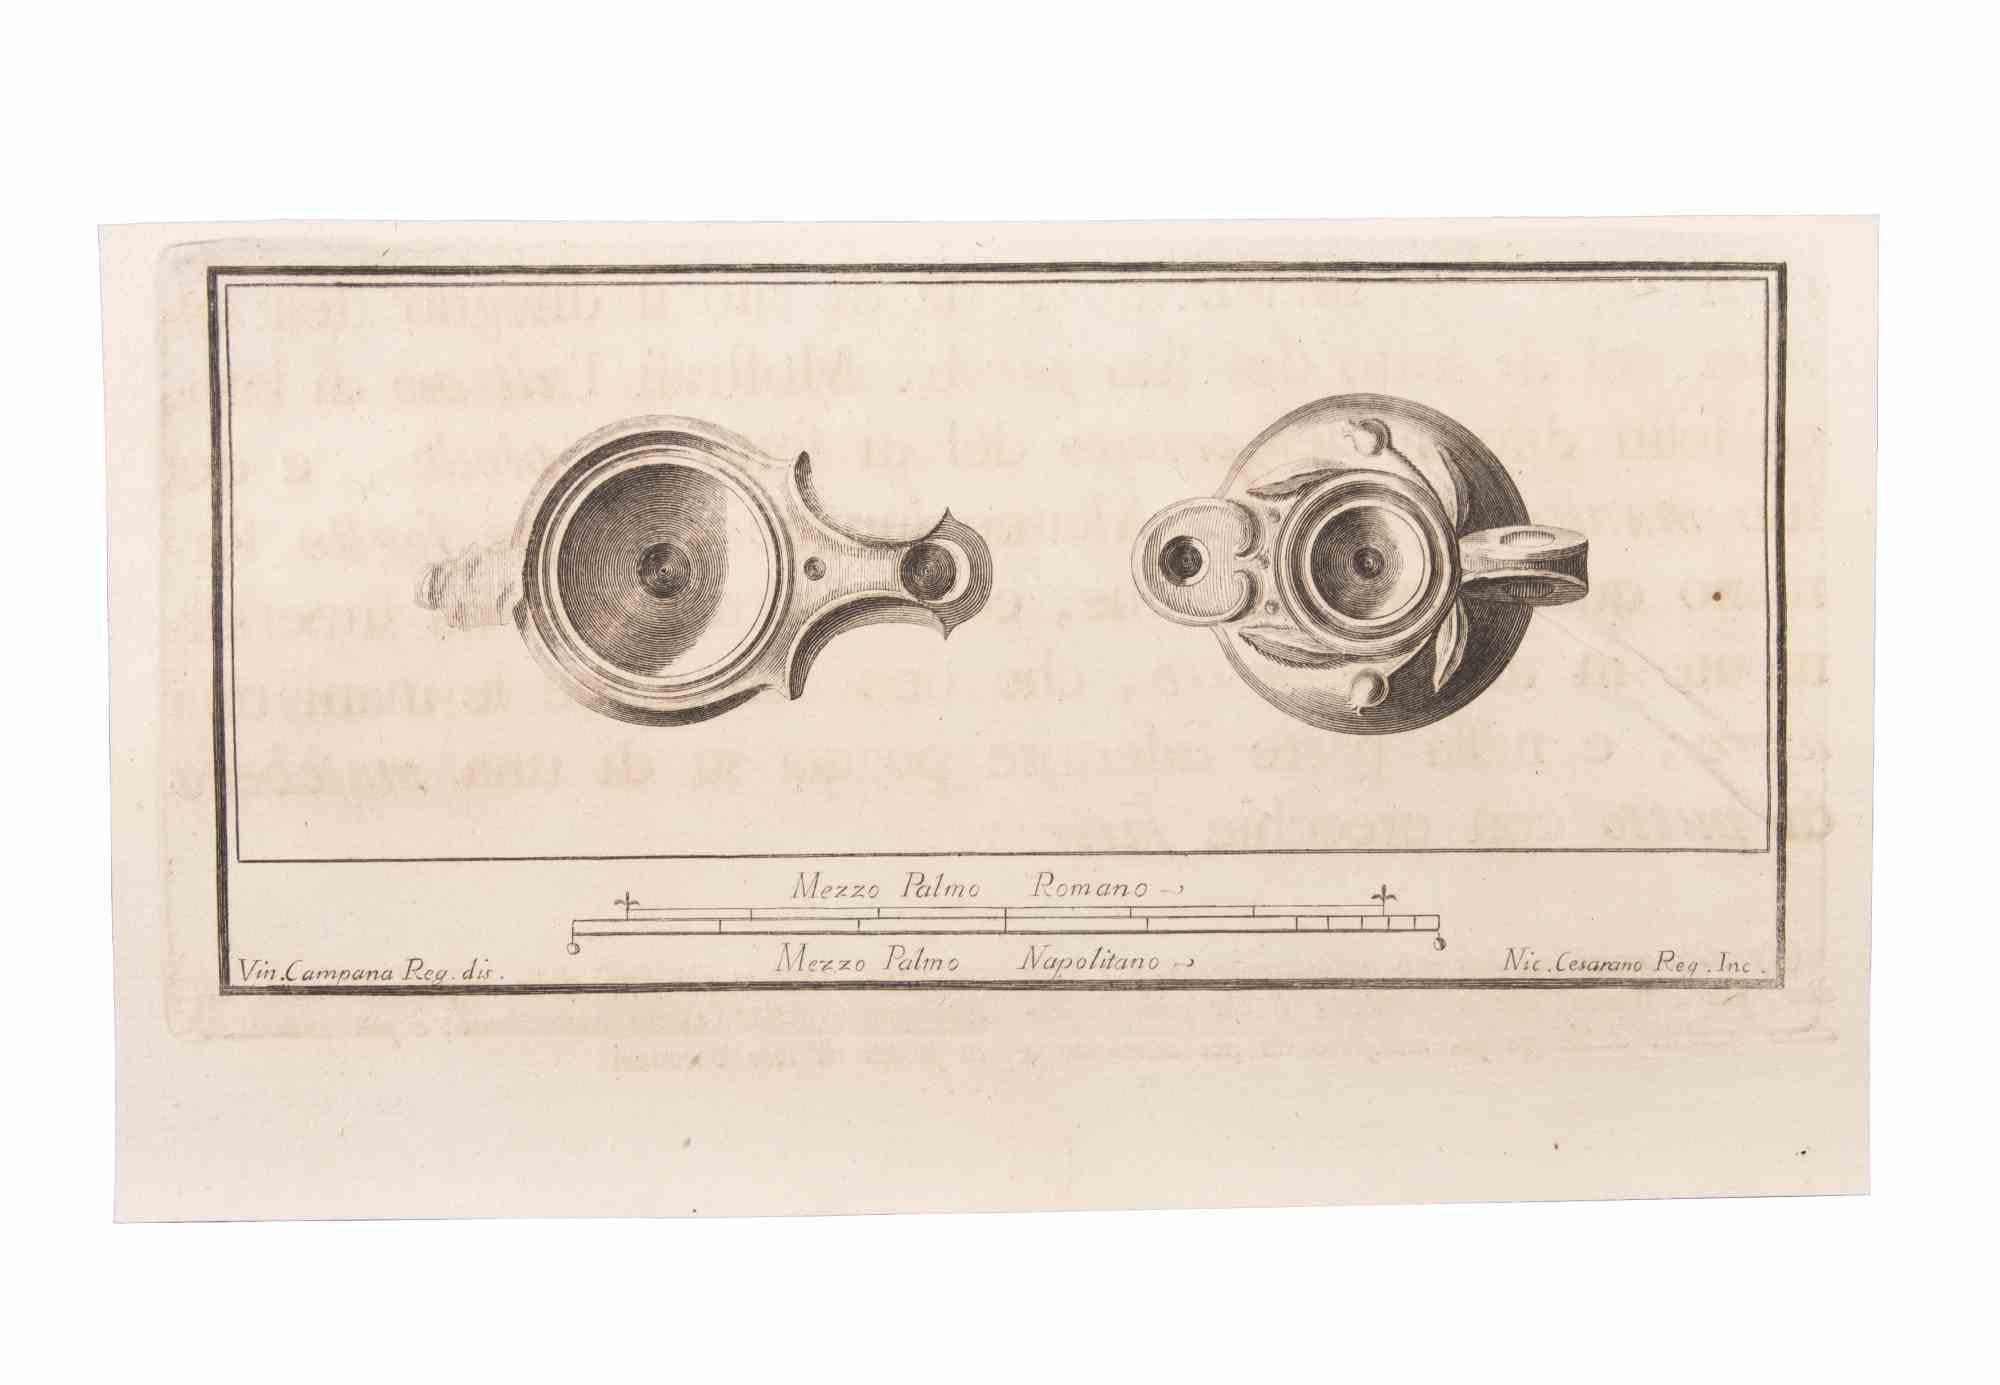 Oil Lamp is an Etching realized by Niccolò Cesarano (1740-1815).

The etching belongs to the print suite “Antiquities of Herculaneum Exposed” (original title: “Le Antichità di Ercolano Esposte”), an eight-volume volume of engravings of the finds